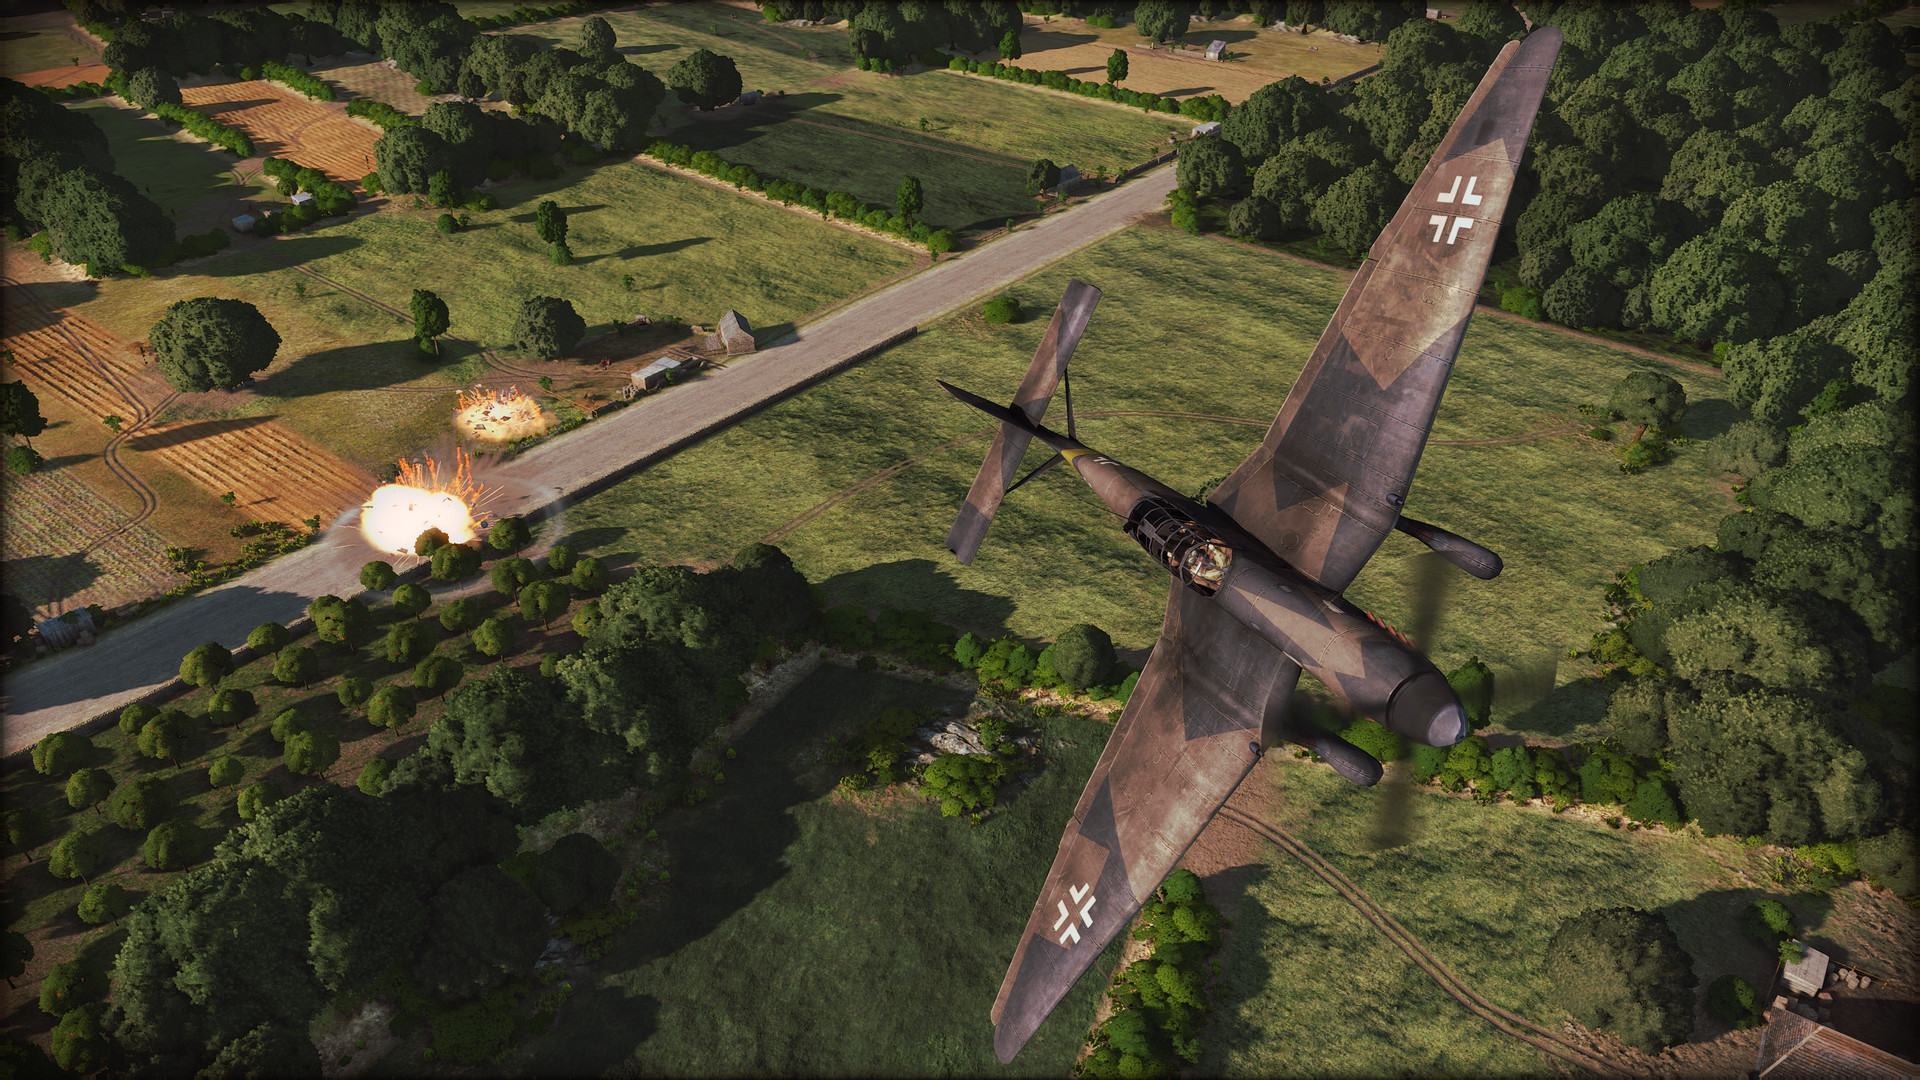 Steel Division: Normandy 44 on Steam